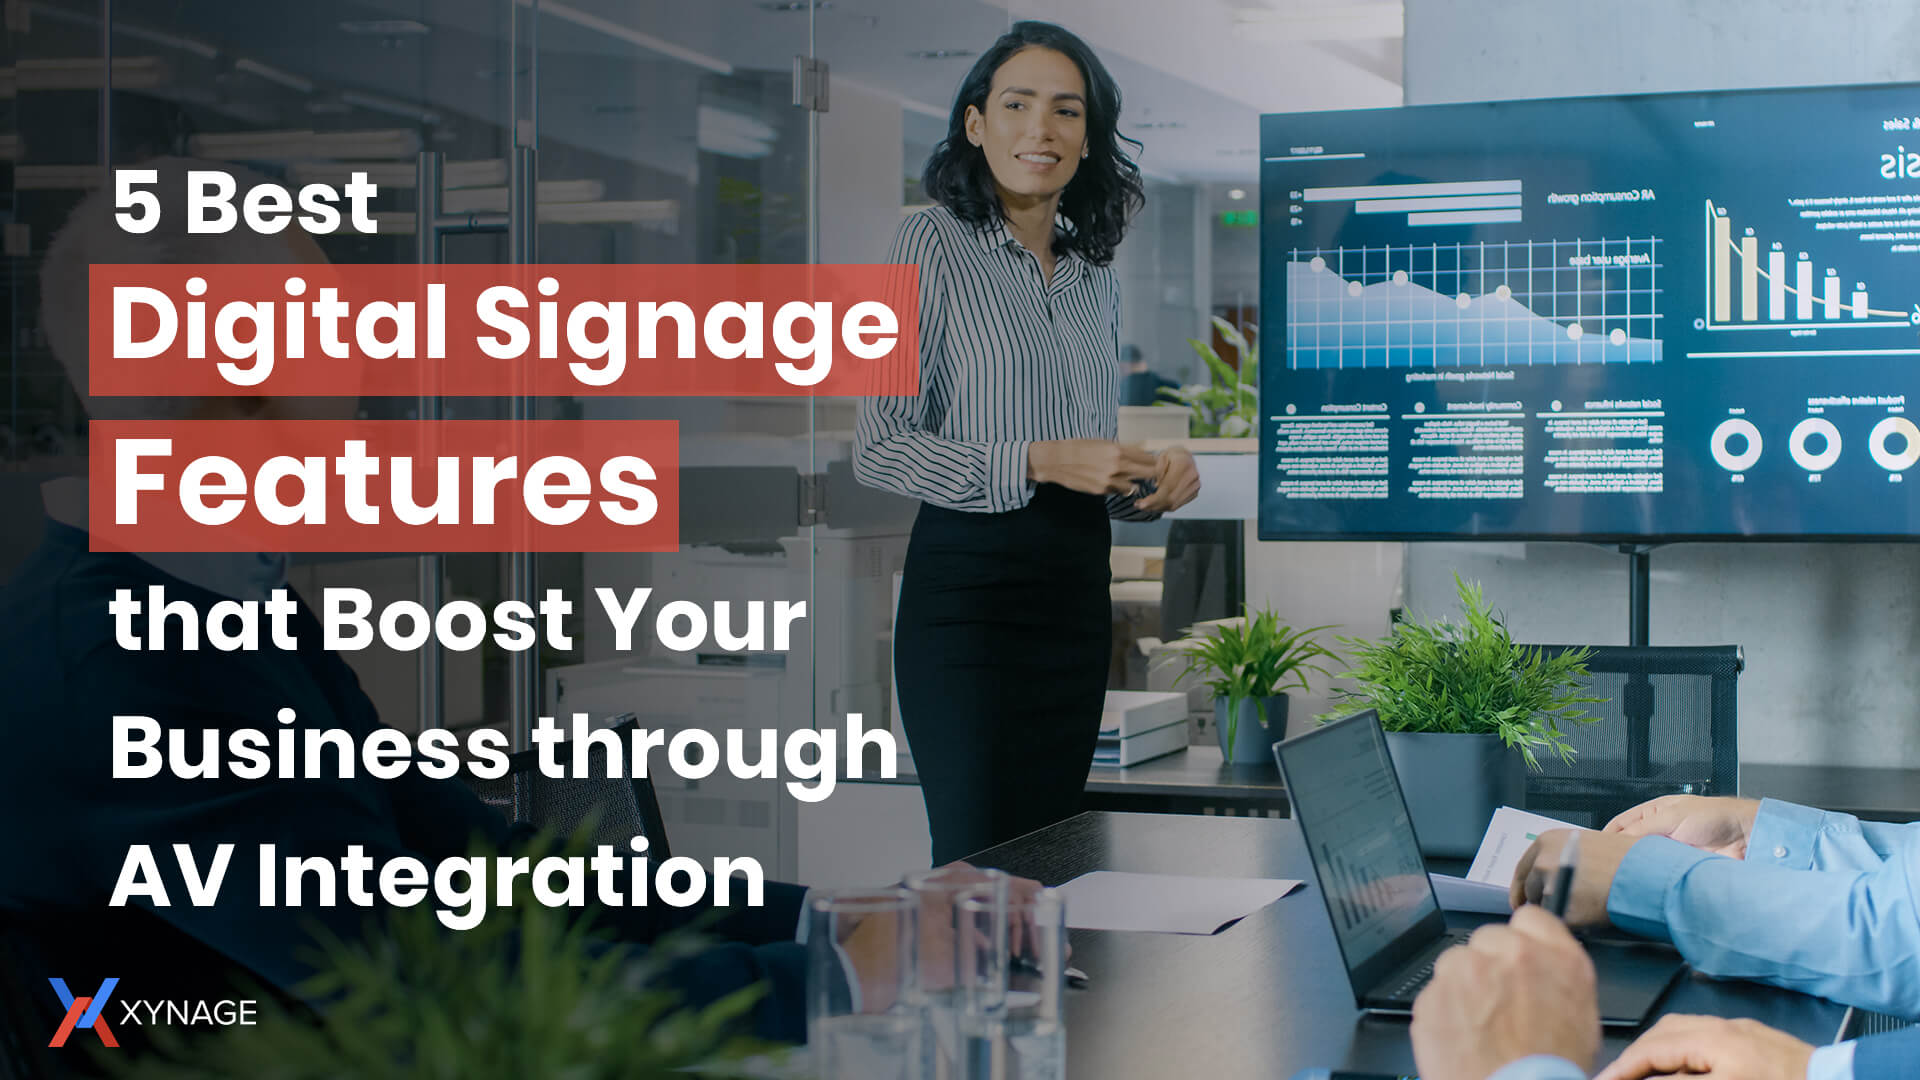 5 Best Digital Signage Features that Boost Your Business through AV Integration